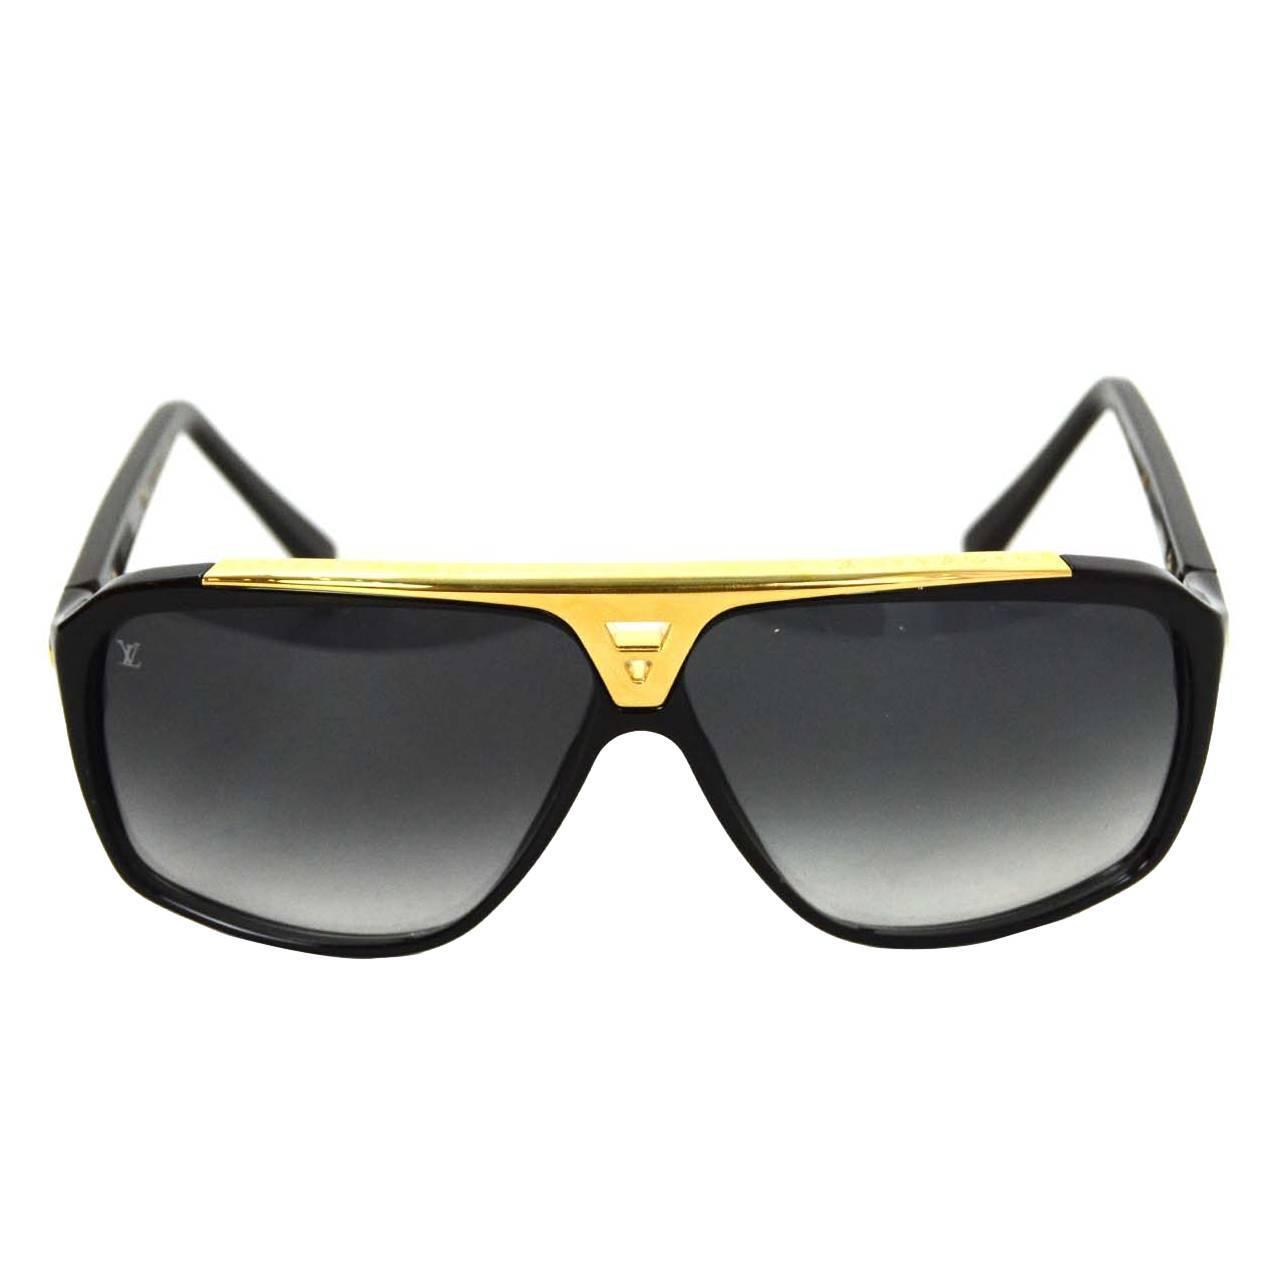 Louis Vuitton Black and Gold-tone Evidence Sunglasses Rt $760 at 1stdibs